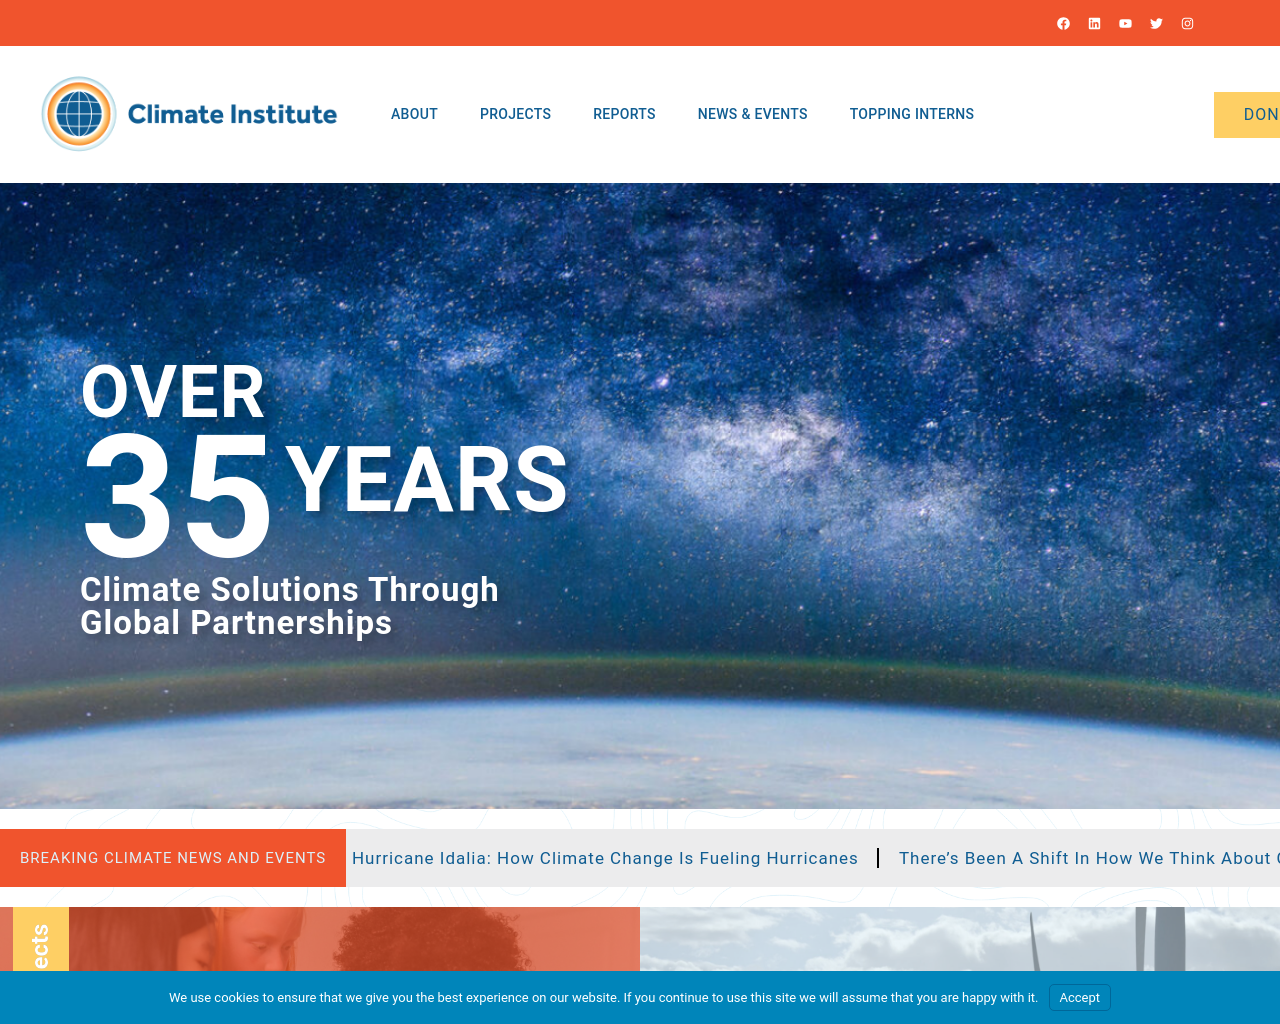 climate.org